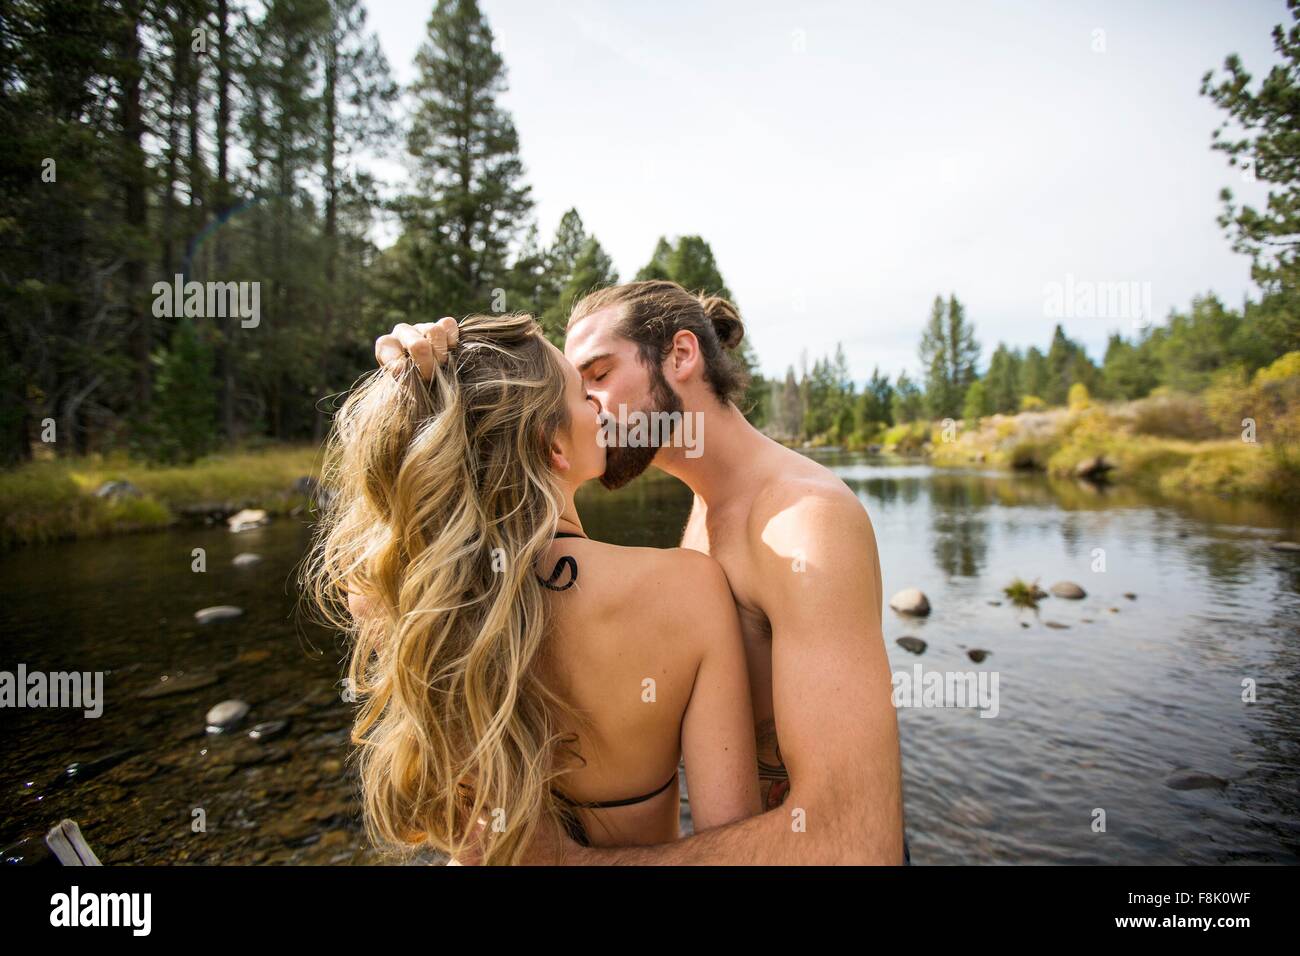 Couple kissing in river, Lake Tahoe, Nevada, USA Banque D'Images